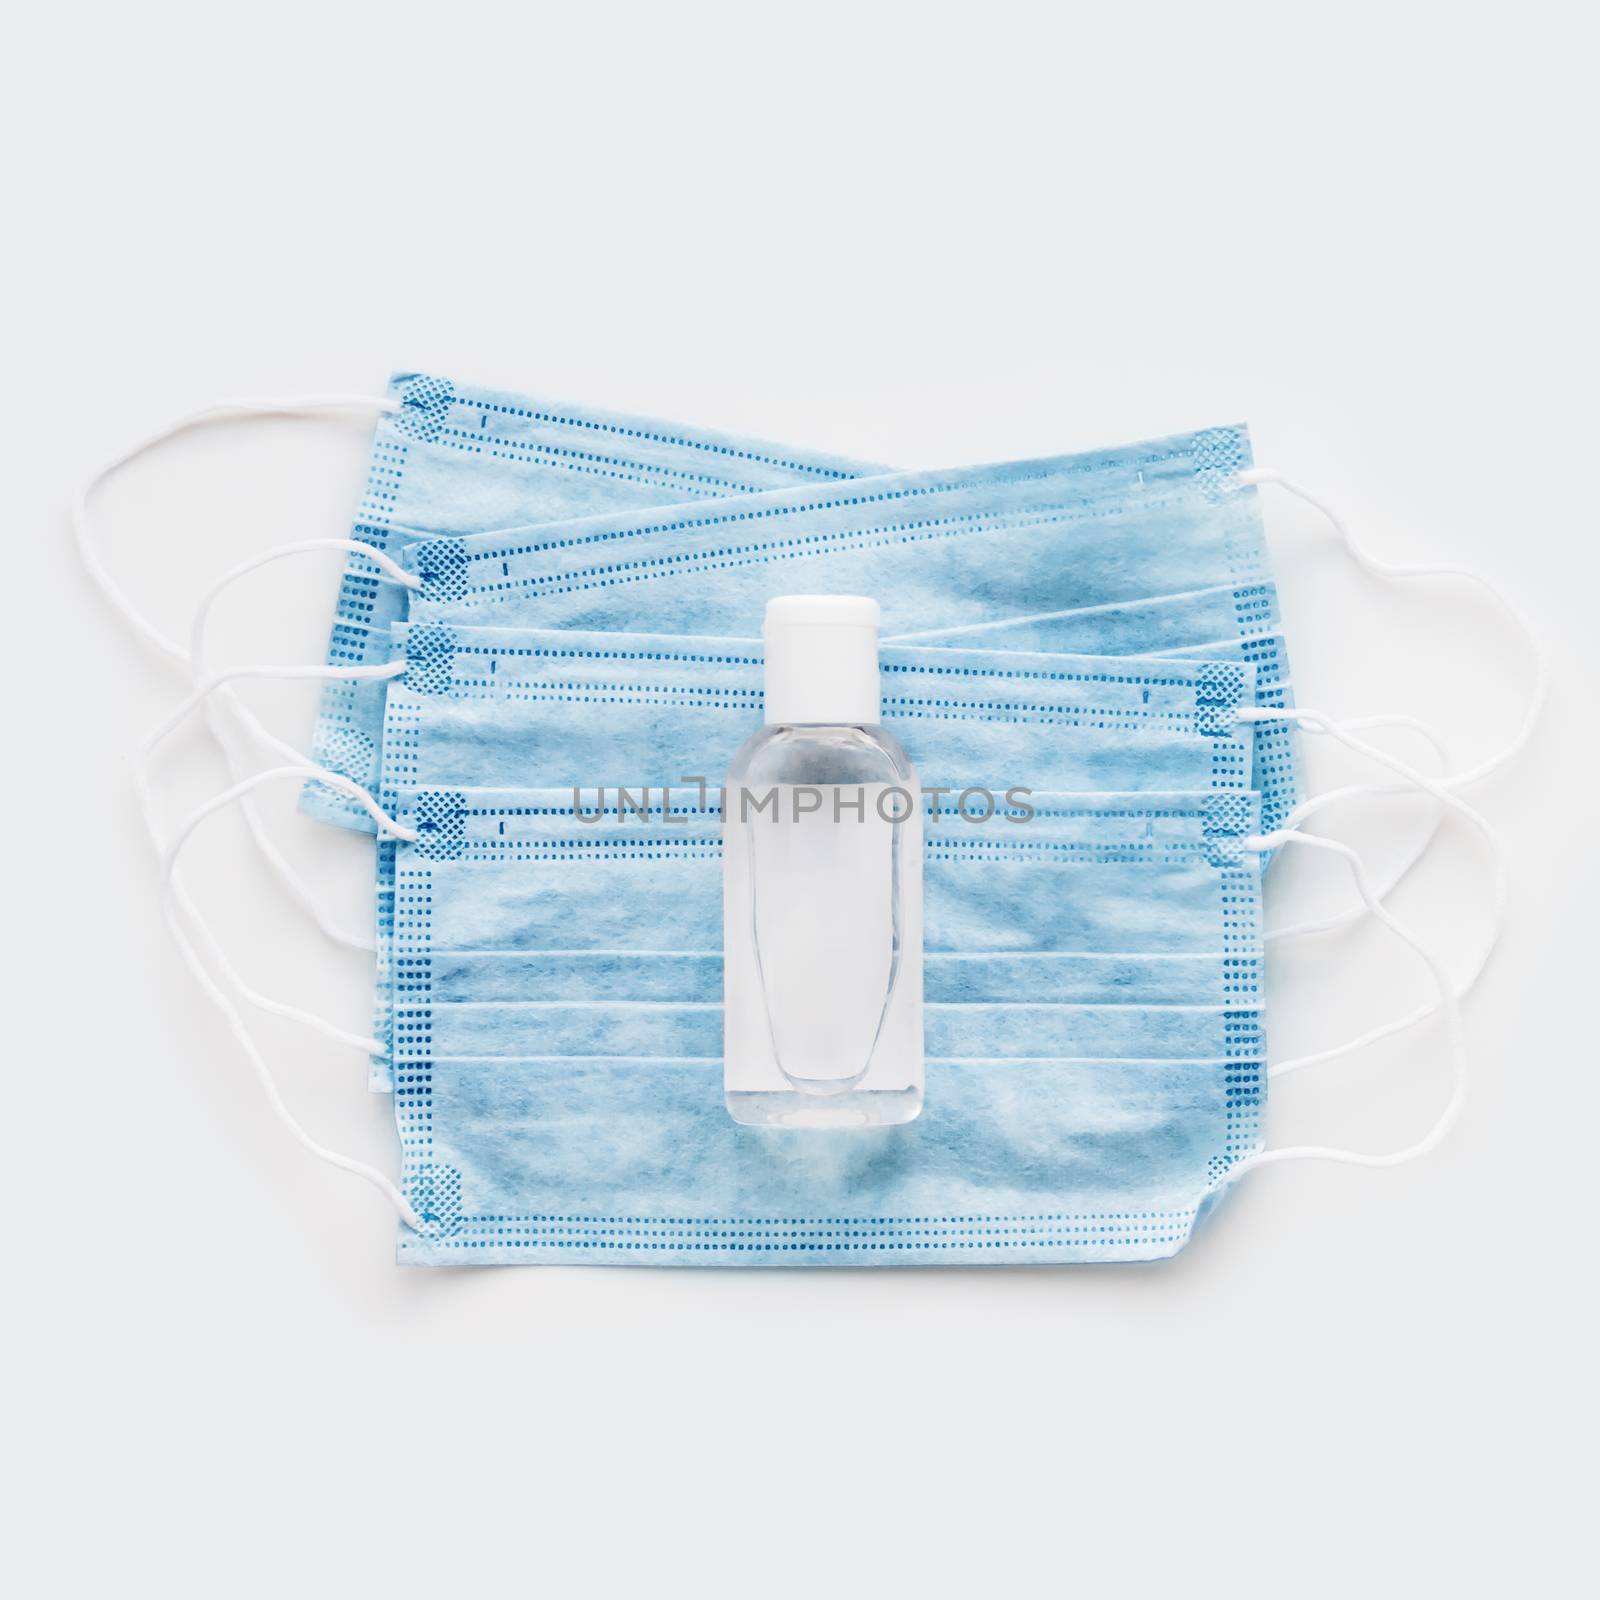 Top view on pack of blue protective medical masks with transparent bottle of sanitizer. Coronavirus COVID-19 concept on white background with copy space.